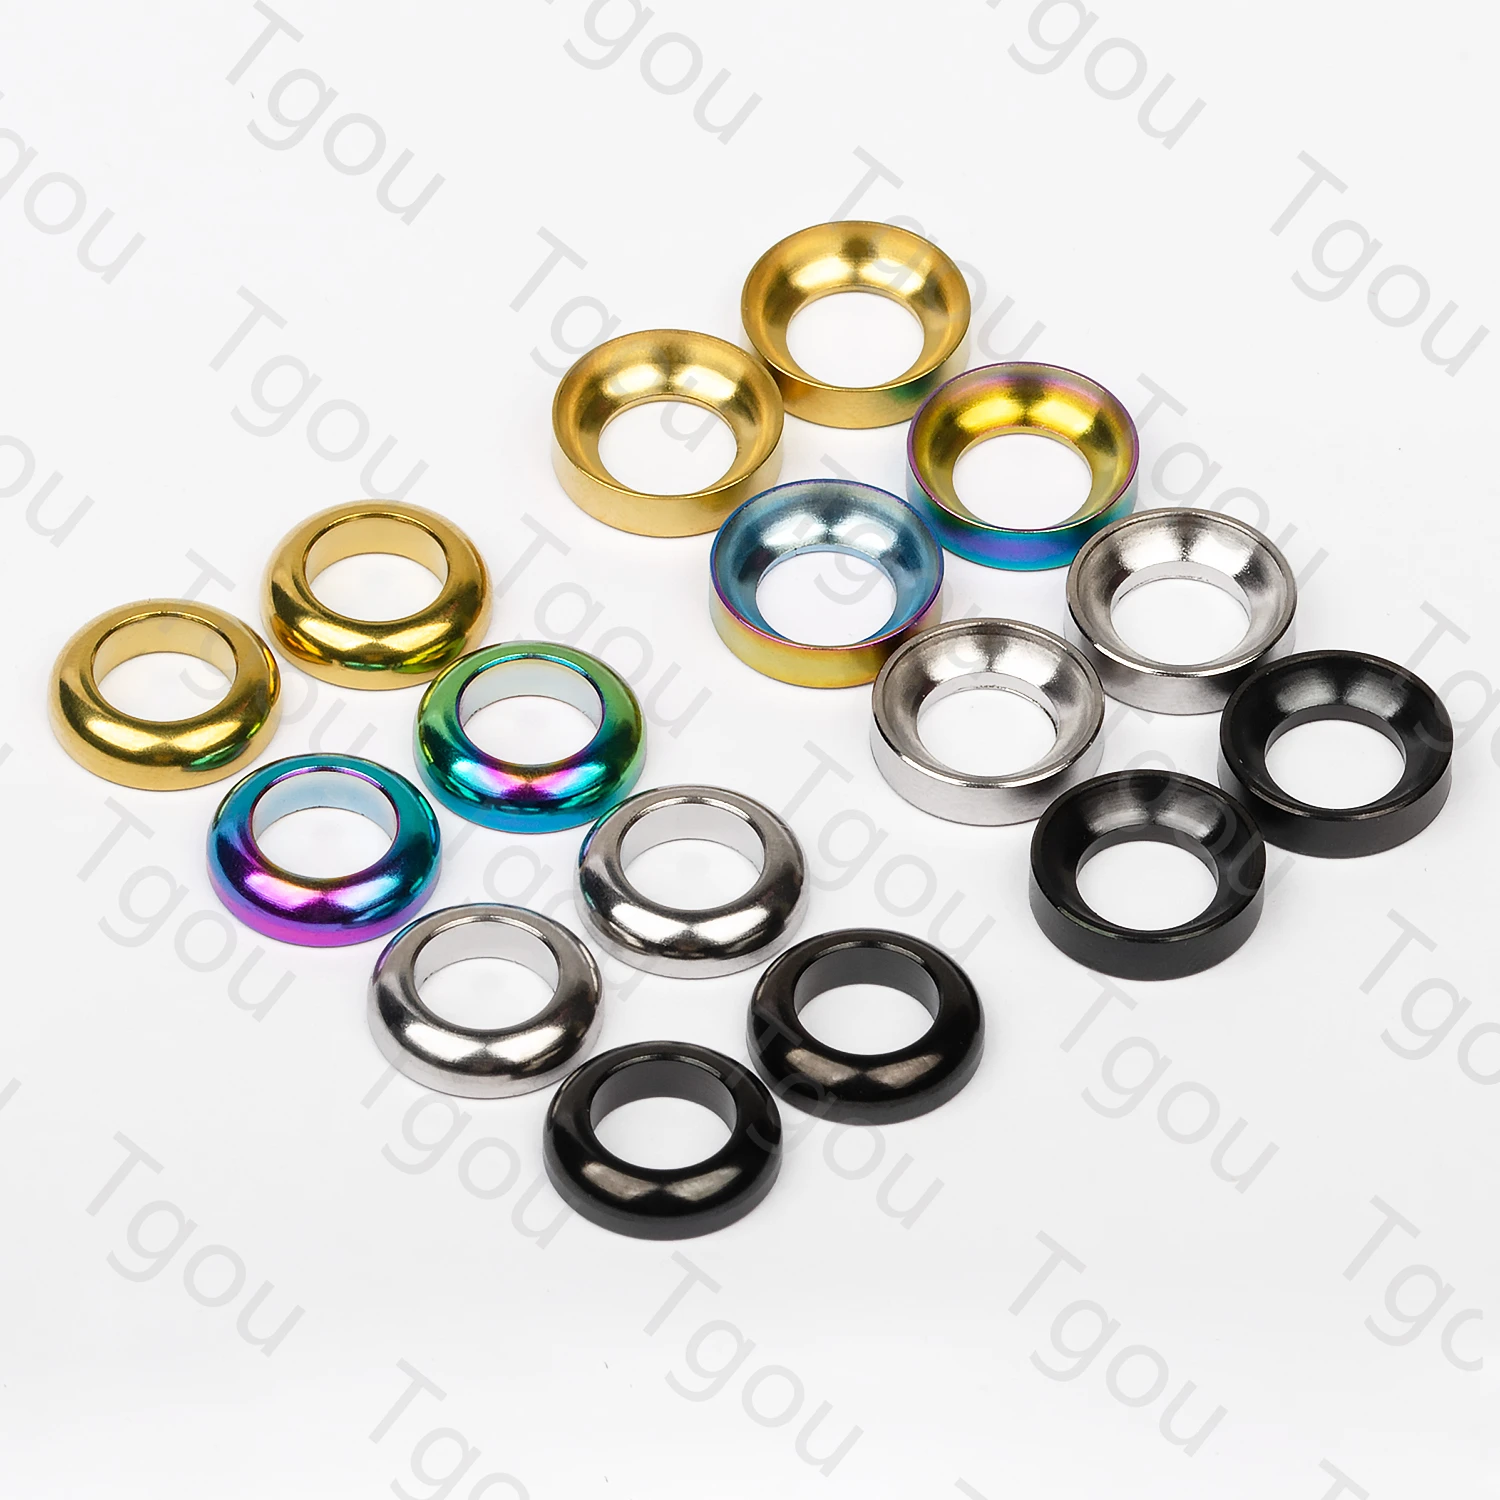 Tgou Titanium Gasket M6 Concave and Convex Washer Spacer for MTB Disc Brake Caliper Group Mounting Bolts 2pcs